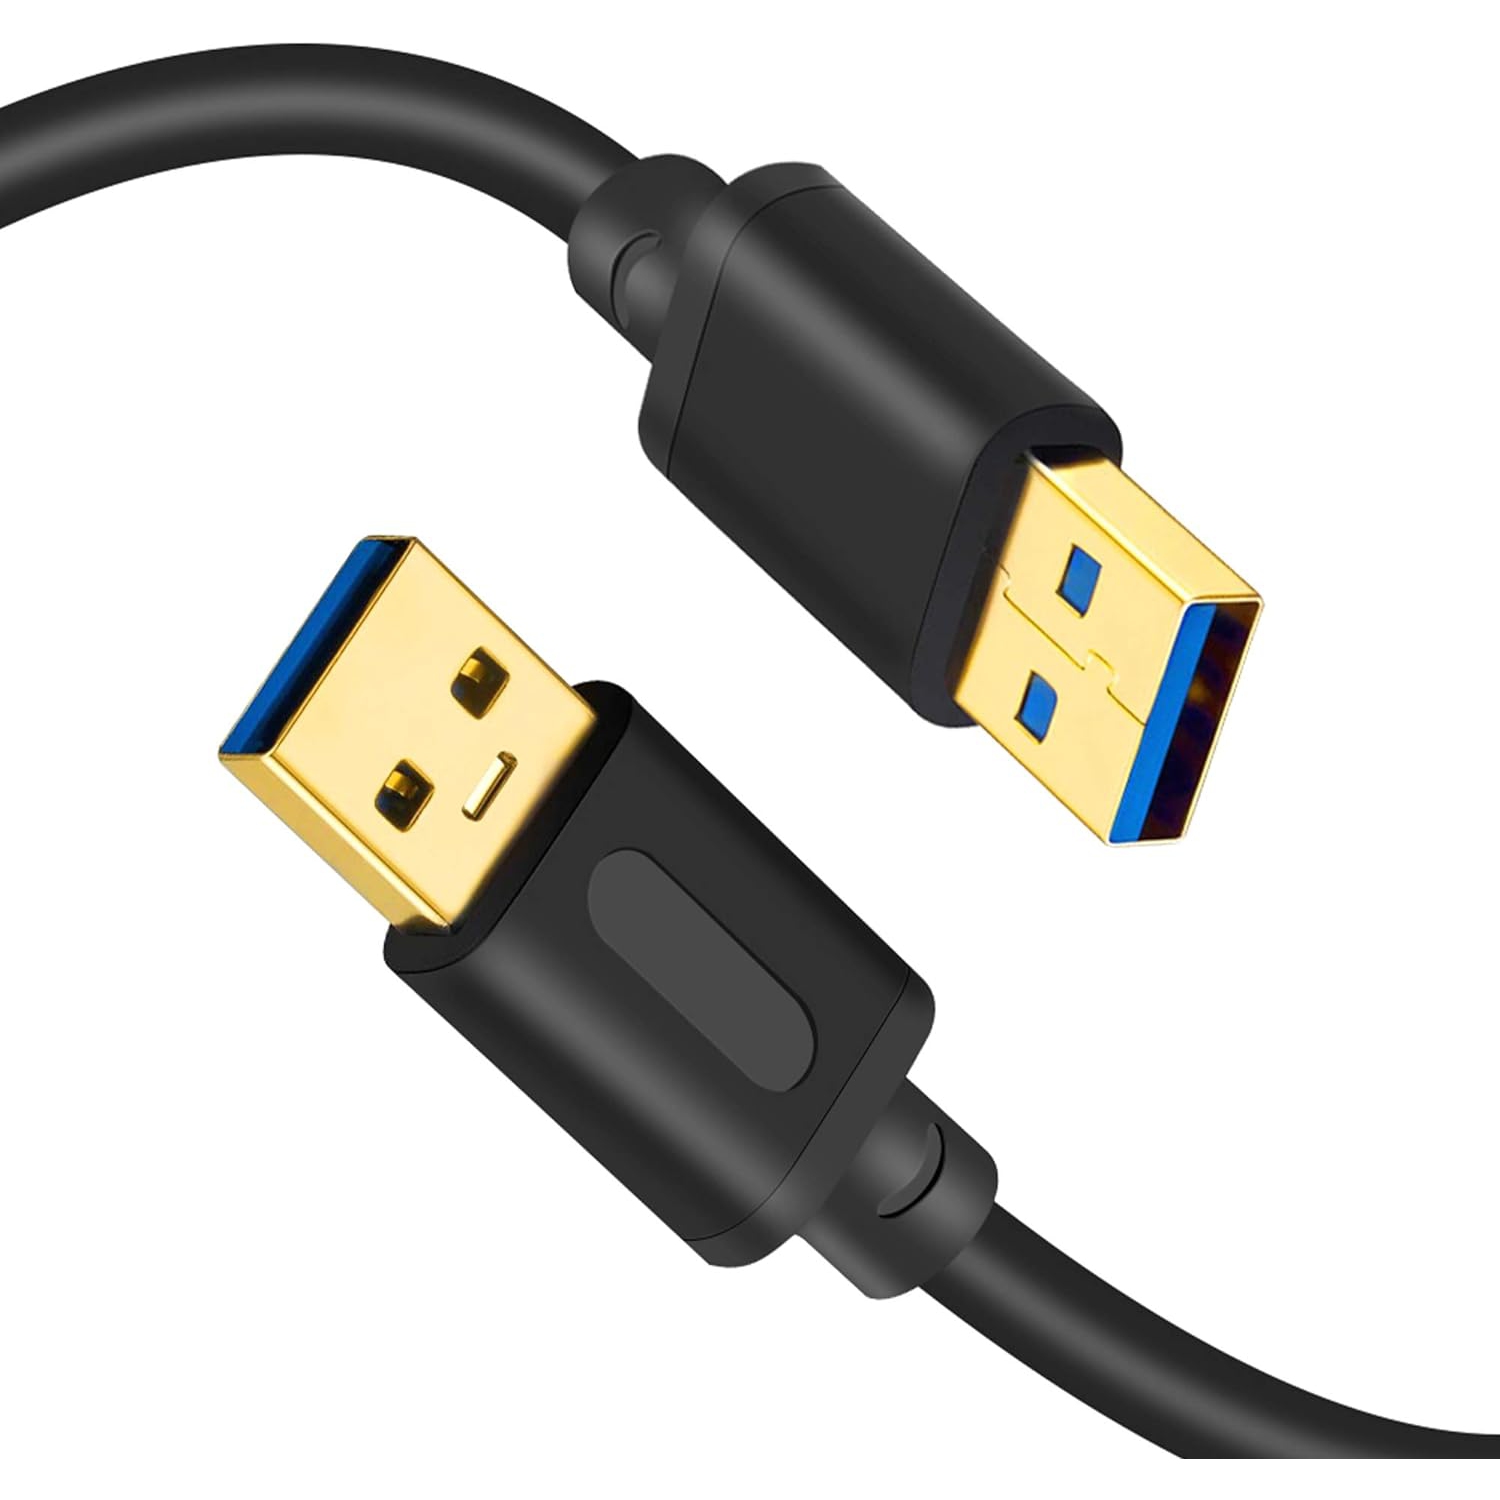 USB 3.0 A to A Male Cable 20Ft, Tan QY USB to USB Cable,USB Male to Male Cable Double End USB Cord with Gold-Plated Connector for Hard Drive Enclosures, DVD Player, Laptop Cooler (